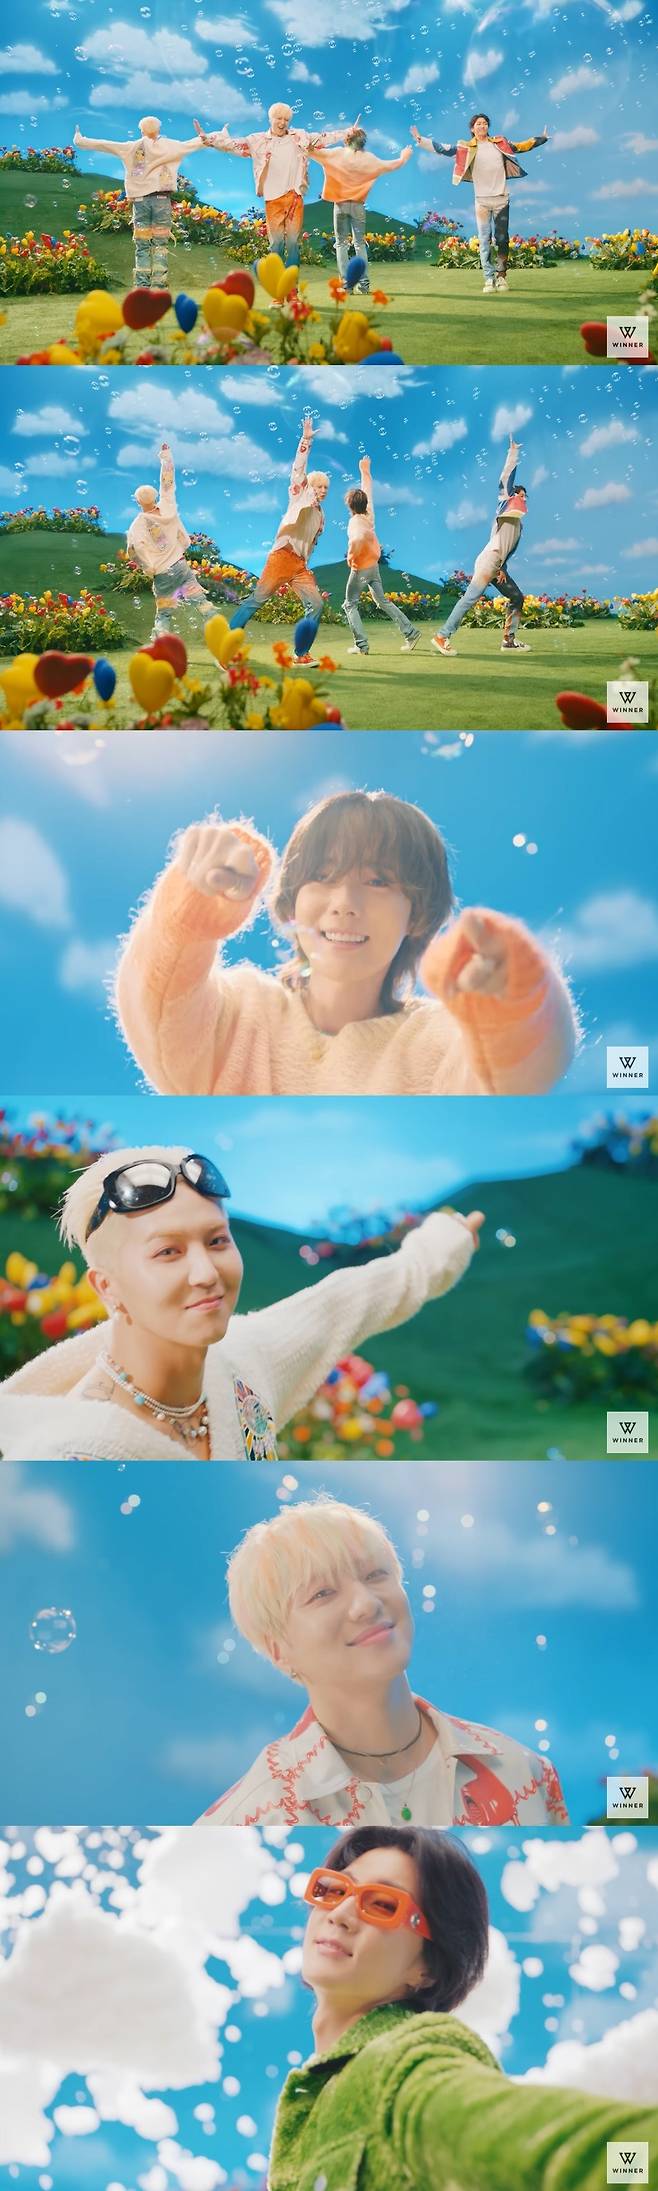 Group WINNER (Kang Seung-yoon, Kim Jin-woo, Seung-Hoon Lee, Song Min-ho) presents the charm of the blue color.WINNER first released its fourth mini album HOLIDAY (Holiday) title song I LOVE U (I Love You) music video teaser on its official SNS on June 30.The video that has been released in the hot interest of global music fans is about 33 seconds of video.The video contains a portion of the highlights of I LOVE U and a point choreography section.The sophisticated and pleasant melody that is not easily forgotten even once, and the charming voice and gesture of WINNER members, raised the expectation of euphemism to the highest level.In addition, the teaser video featured guitar, maracas, and drum sticks, respectively, and added to the expectation of the members who showed positive energy dance in the garden where the heart-shaped flowers were full.Many Music fans predicted WINNERs new song with only 33 seconds teaser.WINNER said, There is a movement to poking all sides with hands and feet in line with the lyrics I LOVE U hoo I like you better than me, he said. It is a dance that anyone can easily follow, I want to enjoy it.The agency said, I LOVE U is a song that expresses the emotions and excitement of love with the emotions of the members only. The sound filled with refreshing feeling will blow the heat of the fans.WINNER will come back to fullness in two years and three months through this album.The New album includes six new songs that boast as much completeness as the title song, including I LOVE U, as well as 10 Minutes, HOLIDAY, Home to, FAMILY (Family) and Sucking Finger.WINNERs refreshing music in time for the summer season is only five years since she was active as a single OUR TWENTY FOR (Hour Twenty Poe) featuring double title songs LOVE ME LOVE ME (Lub Mirummy) and ISLAND (Ireland) on August 4, 2017.The New album will be released at 6 pm on July 5th.Since its debut in August 2014, it is noteworthy that WINNER, which has built its own wide and solid music world with a variety of genres, will convey some different charms through new songs.